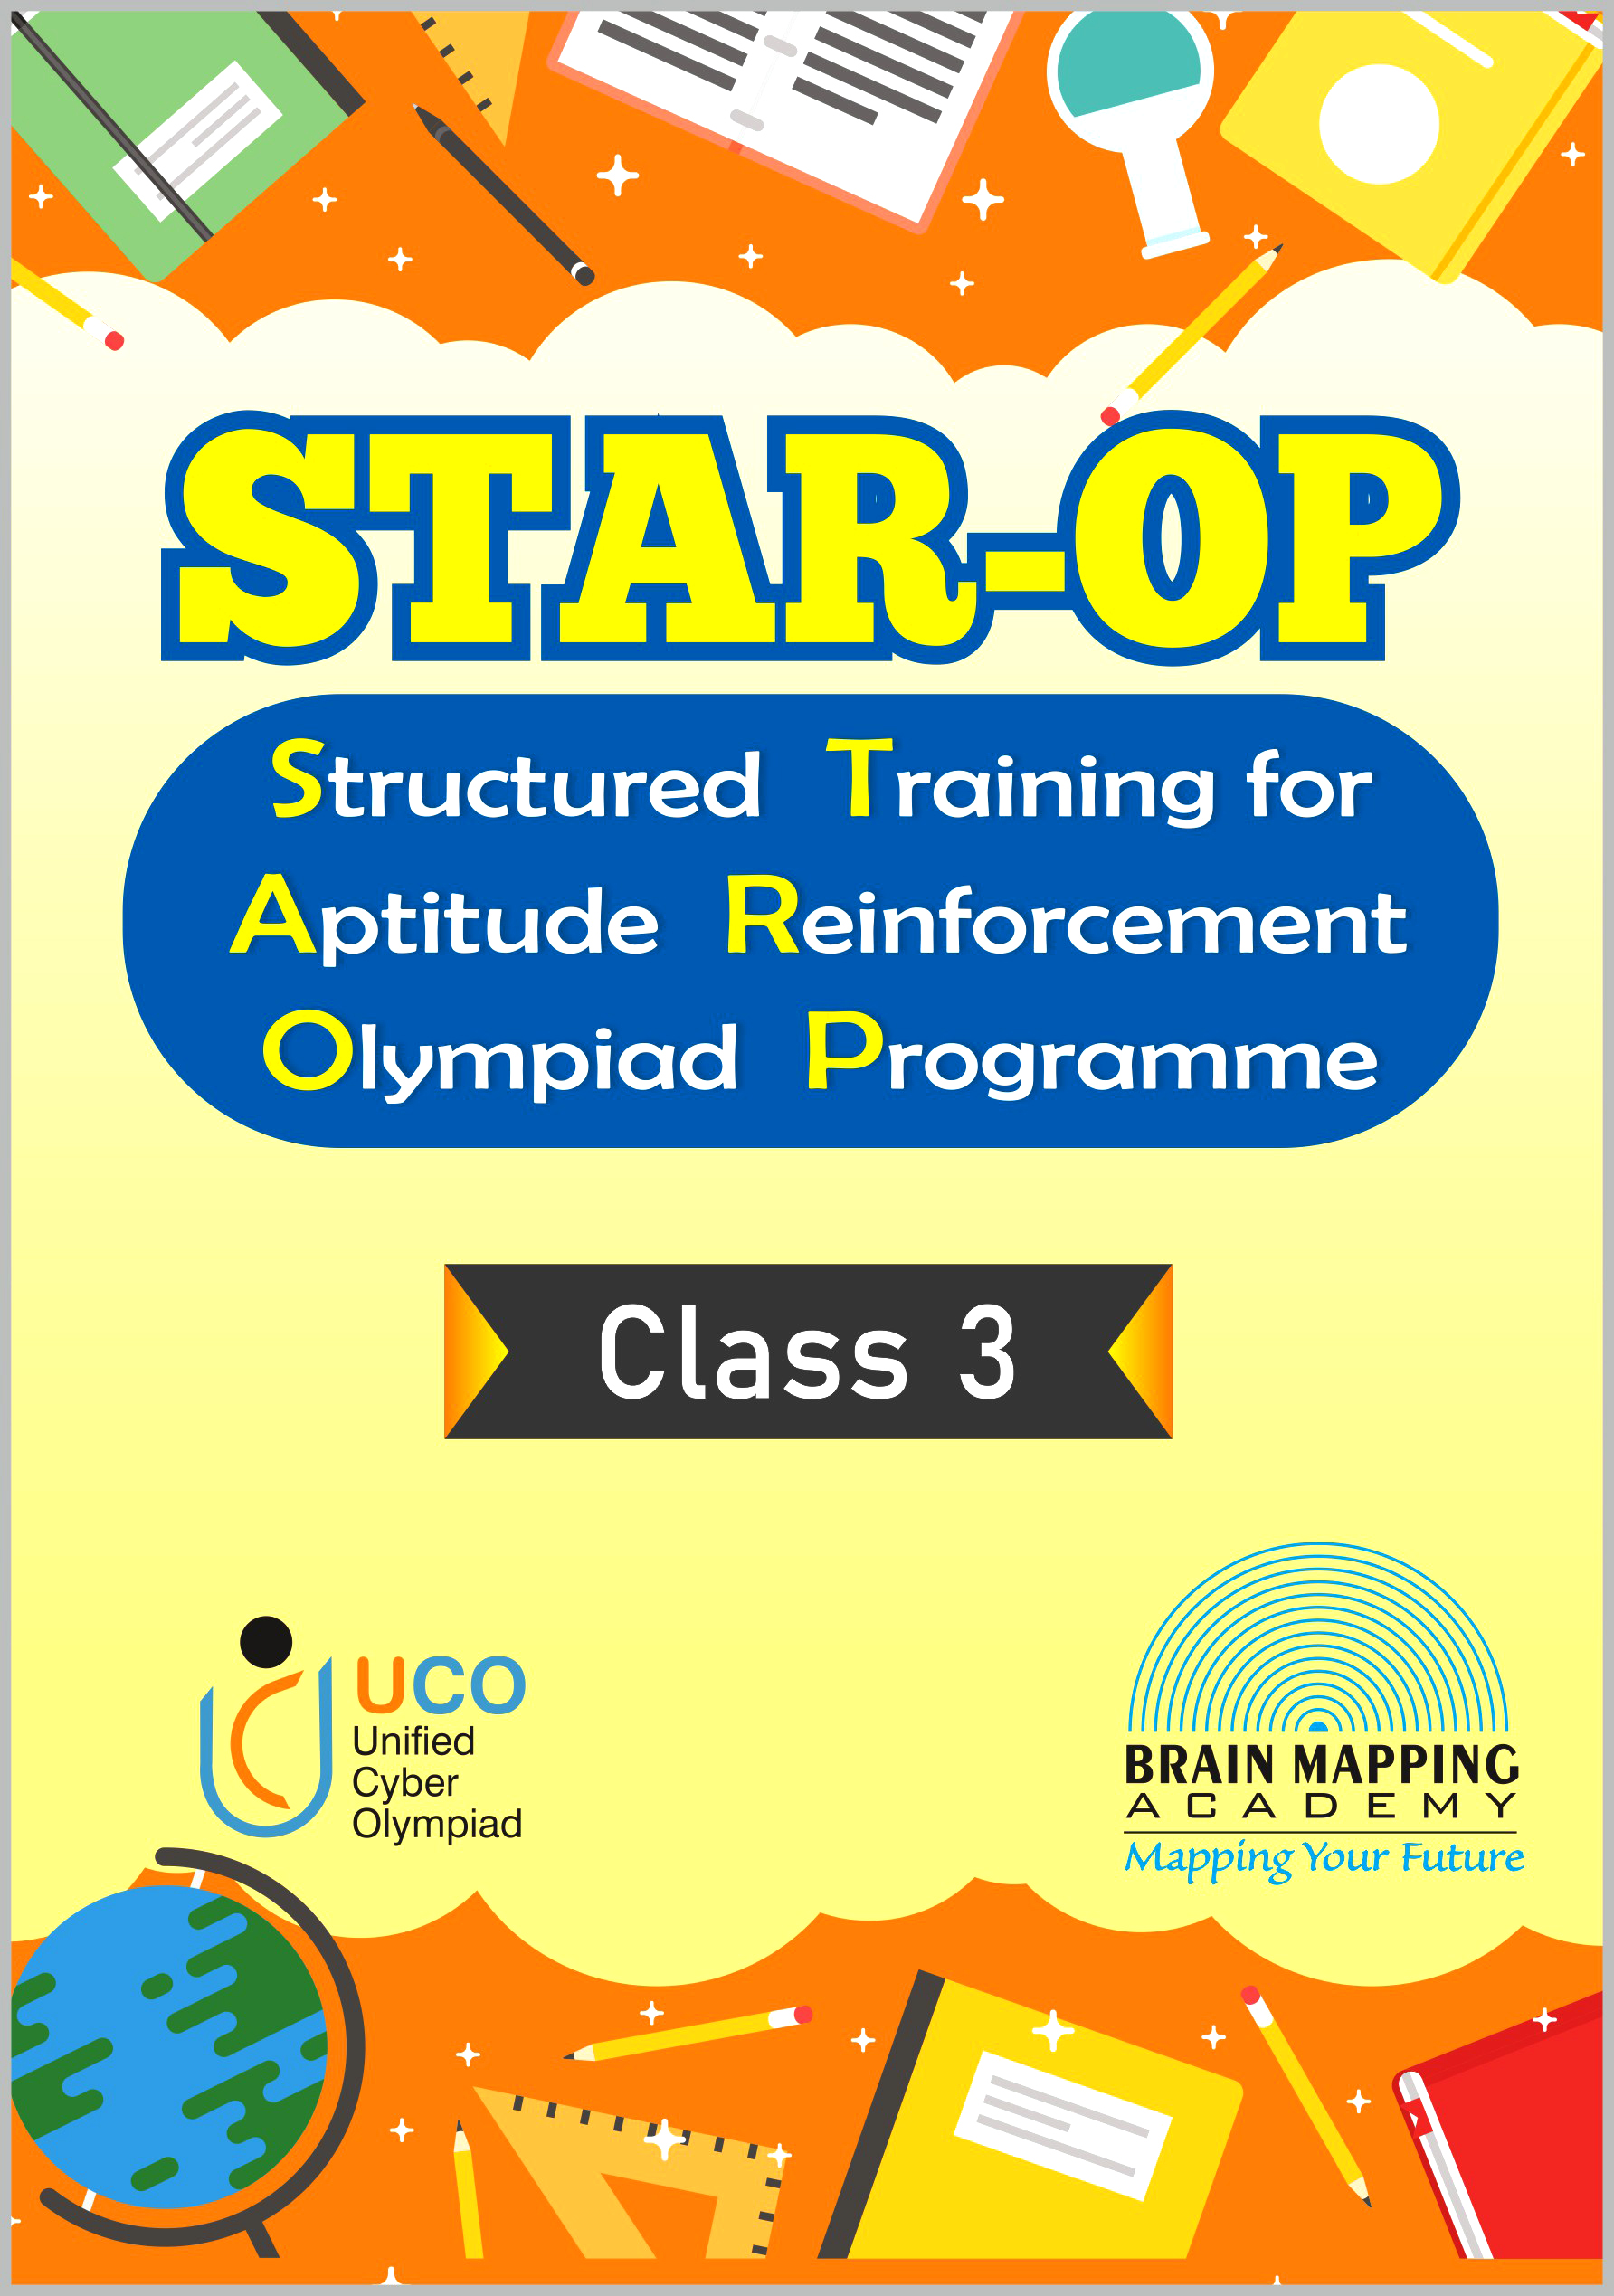 STAR-OP-UCO-Class – 3 – Brain Mapping Academy